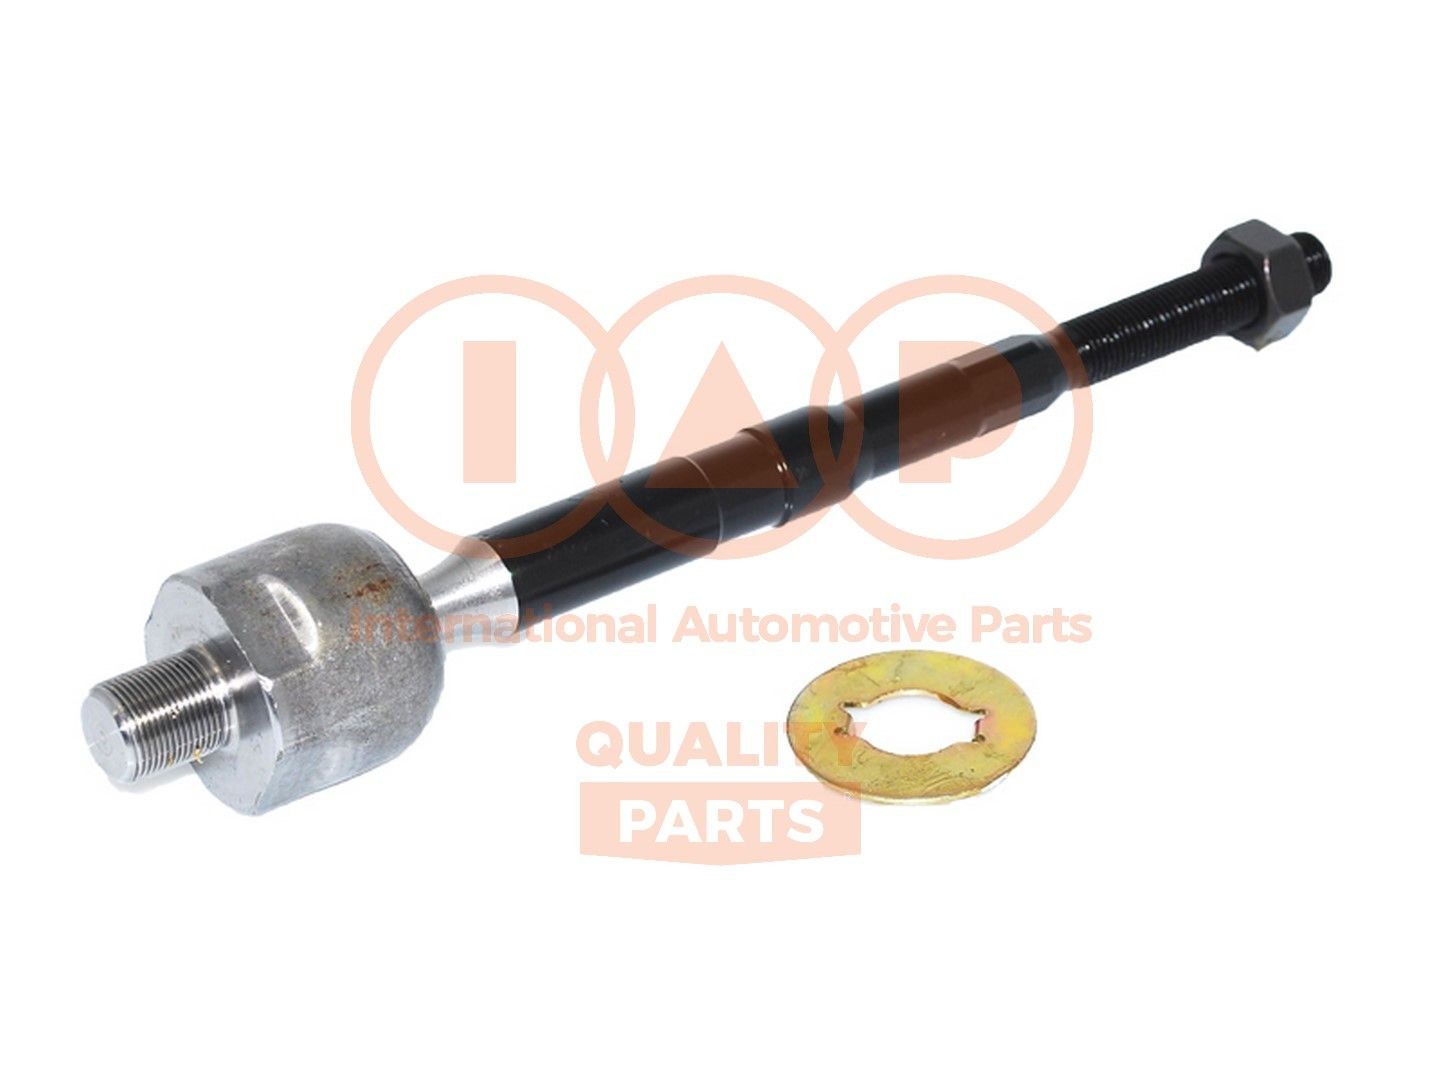 IAP QUALITY PARTS Front axle both sides, 237 mm Length: 237mm Tie rod axle joint 614-13200 buy